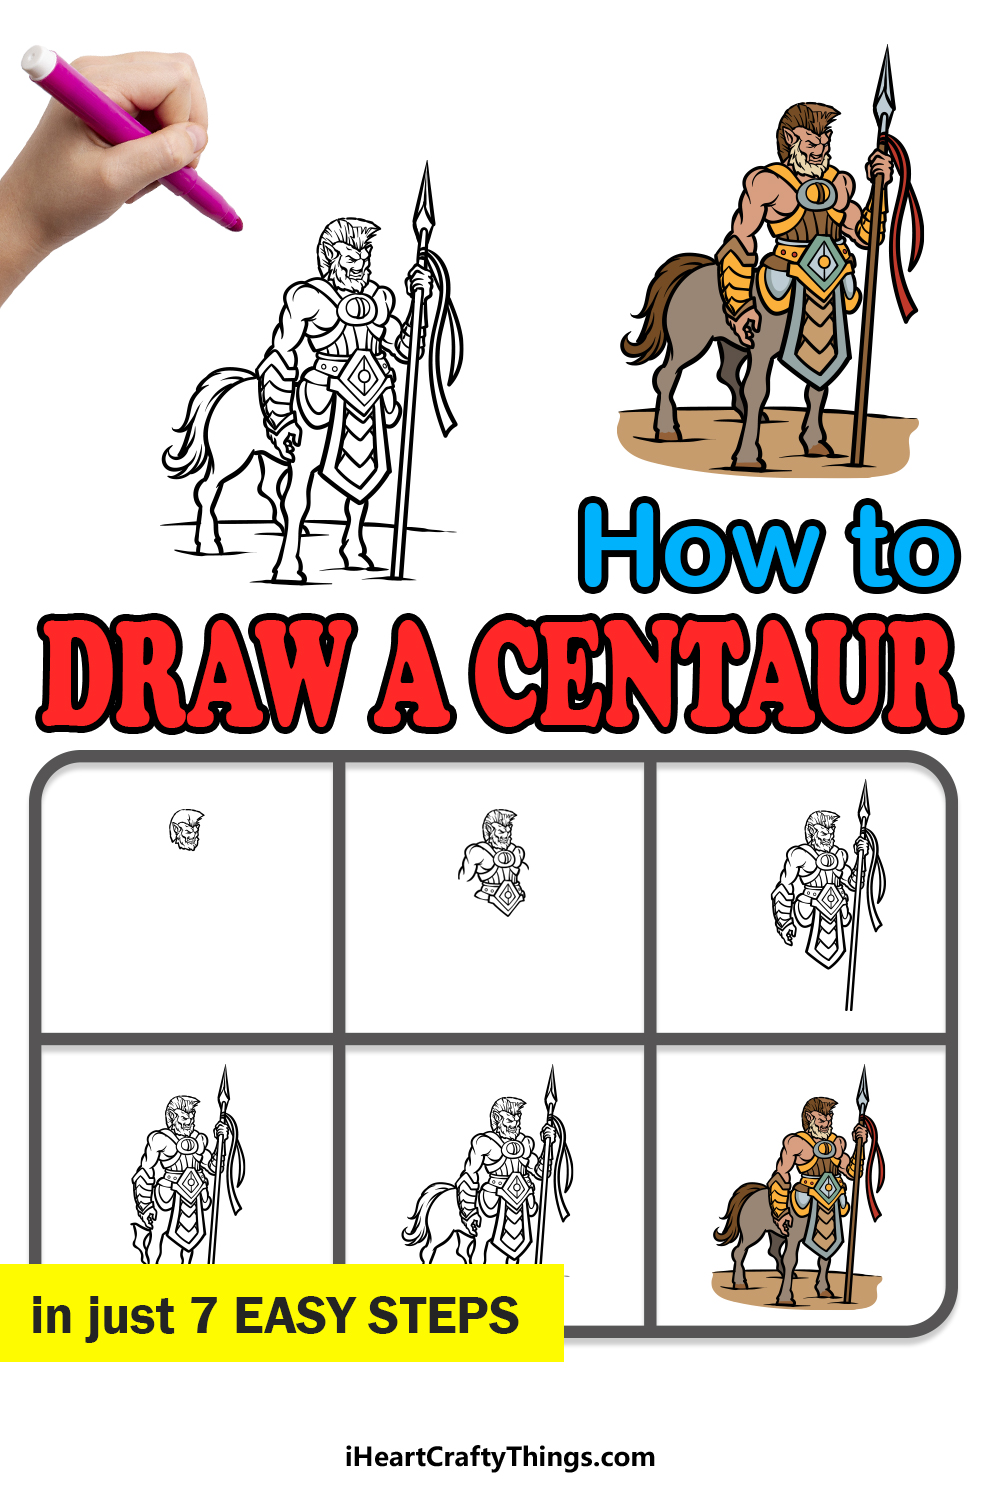 how to draw a Centaur in 7 easy steps